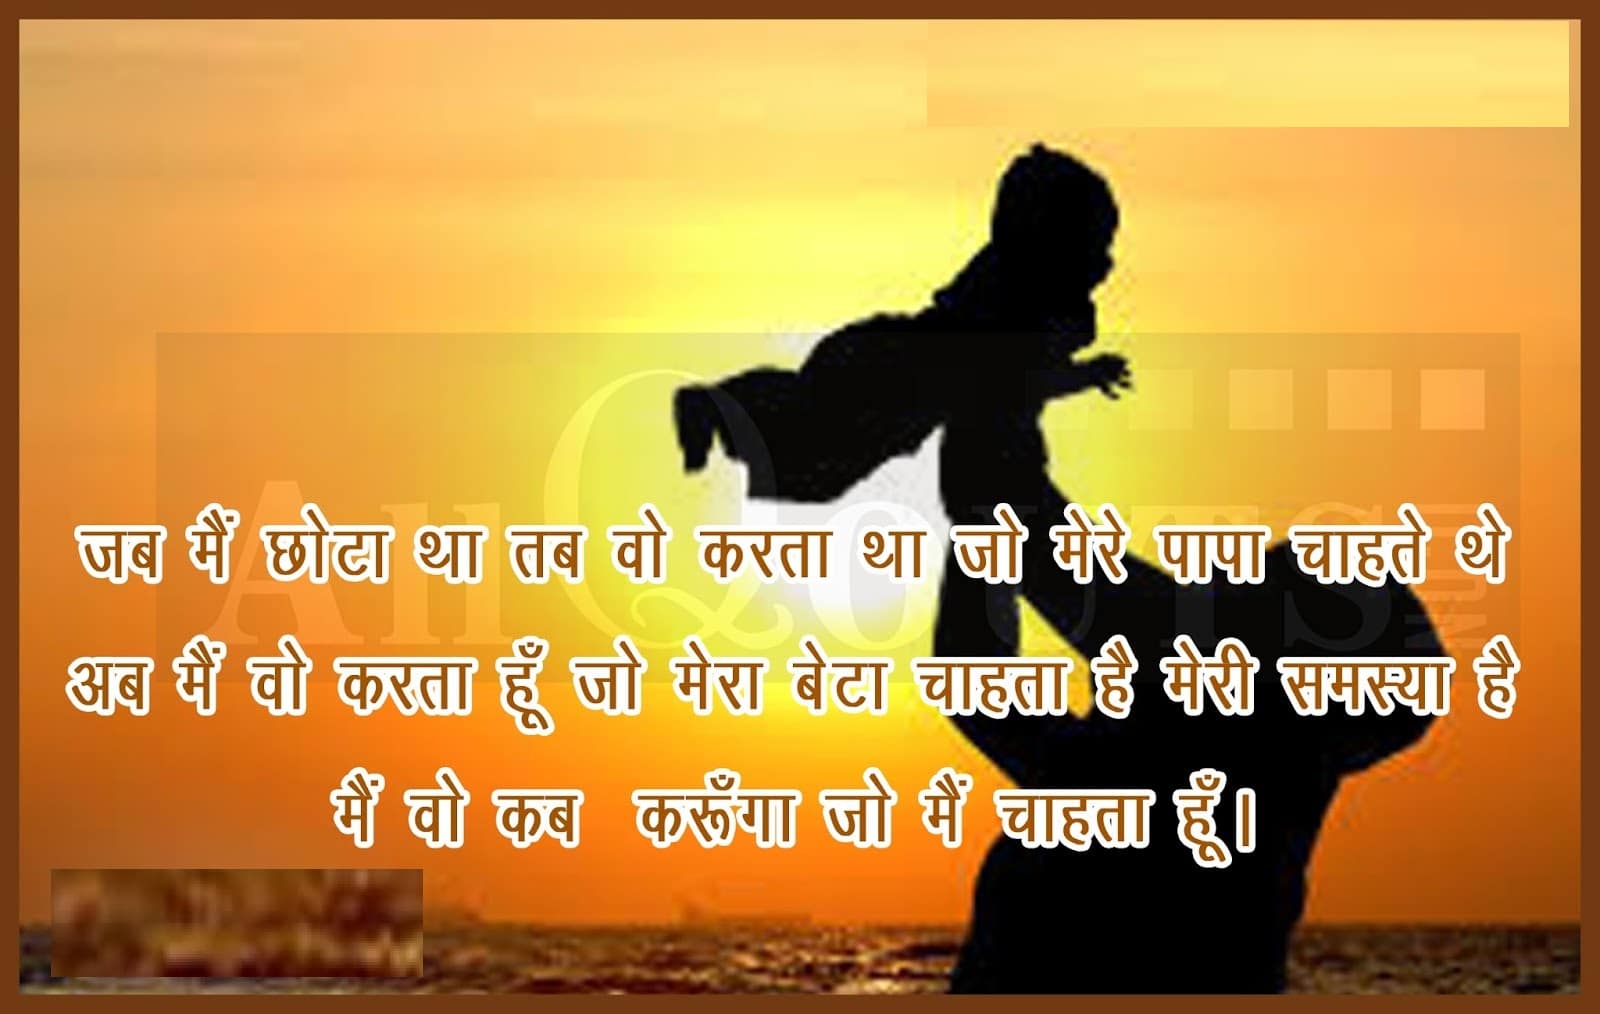 Fathers Day Quotes And Poem In Hindi Oppidan Library